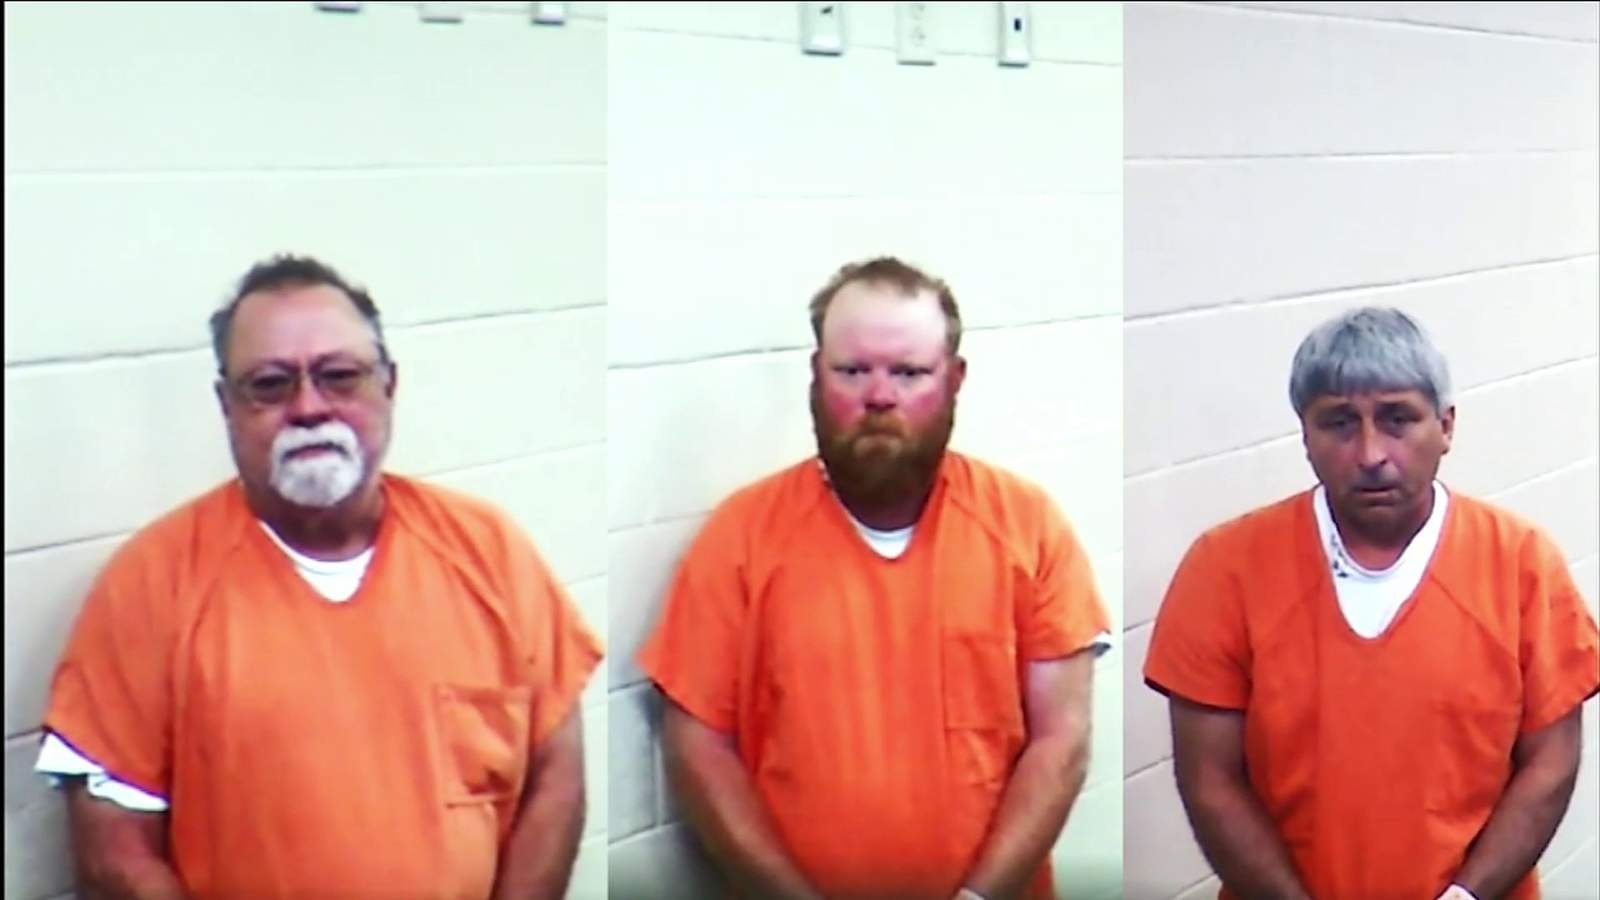 3 men indicted on murder charges in killing of Ahmaud Arbery